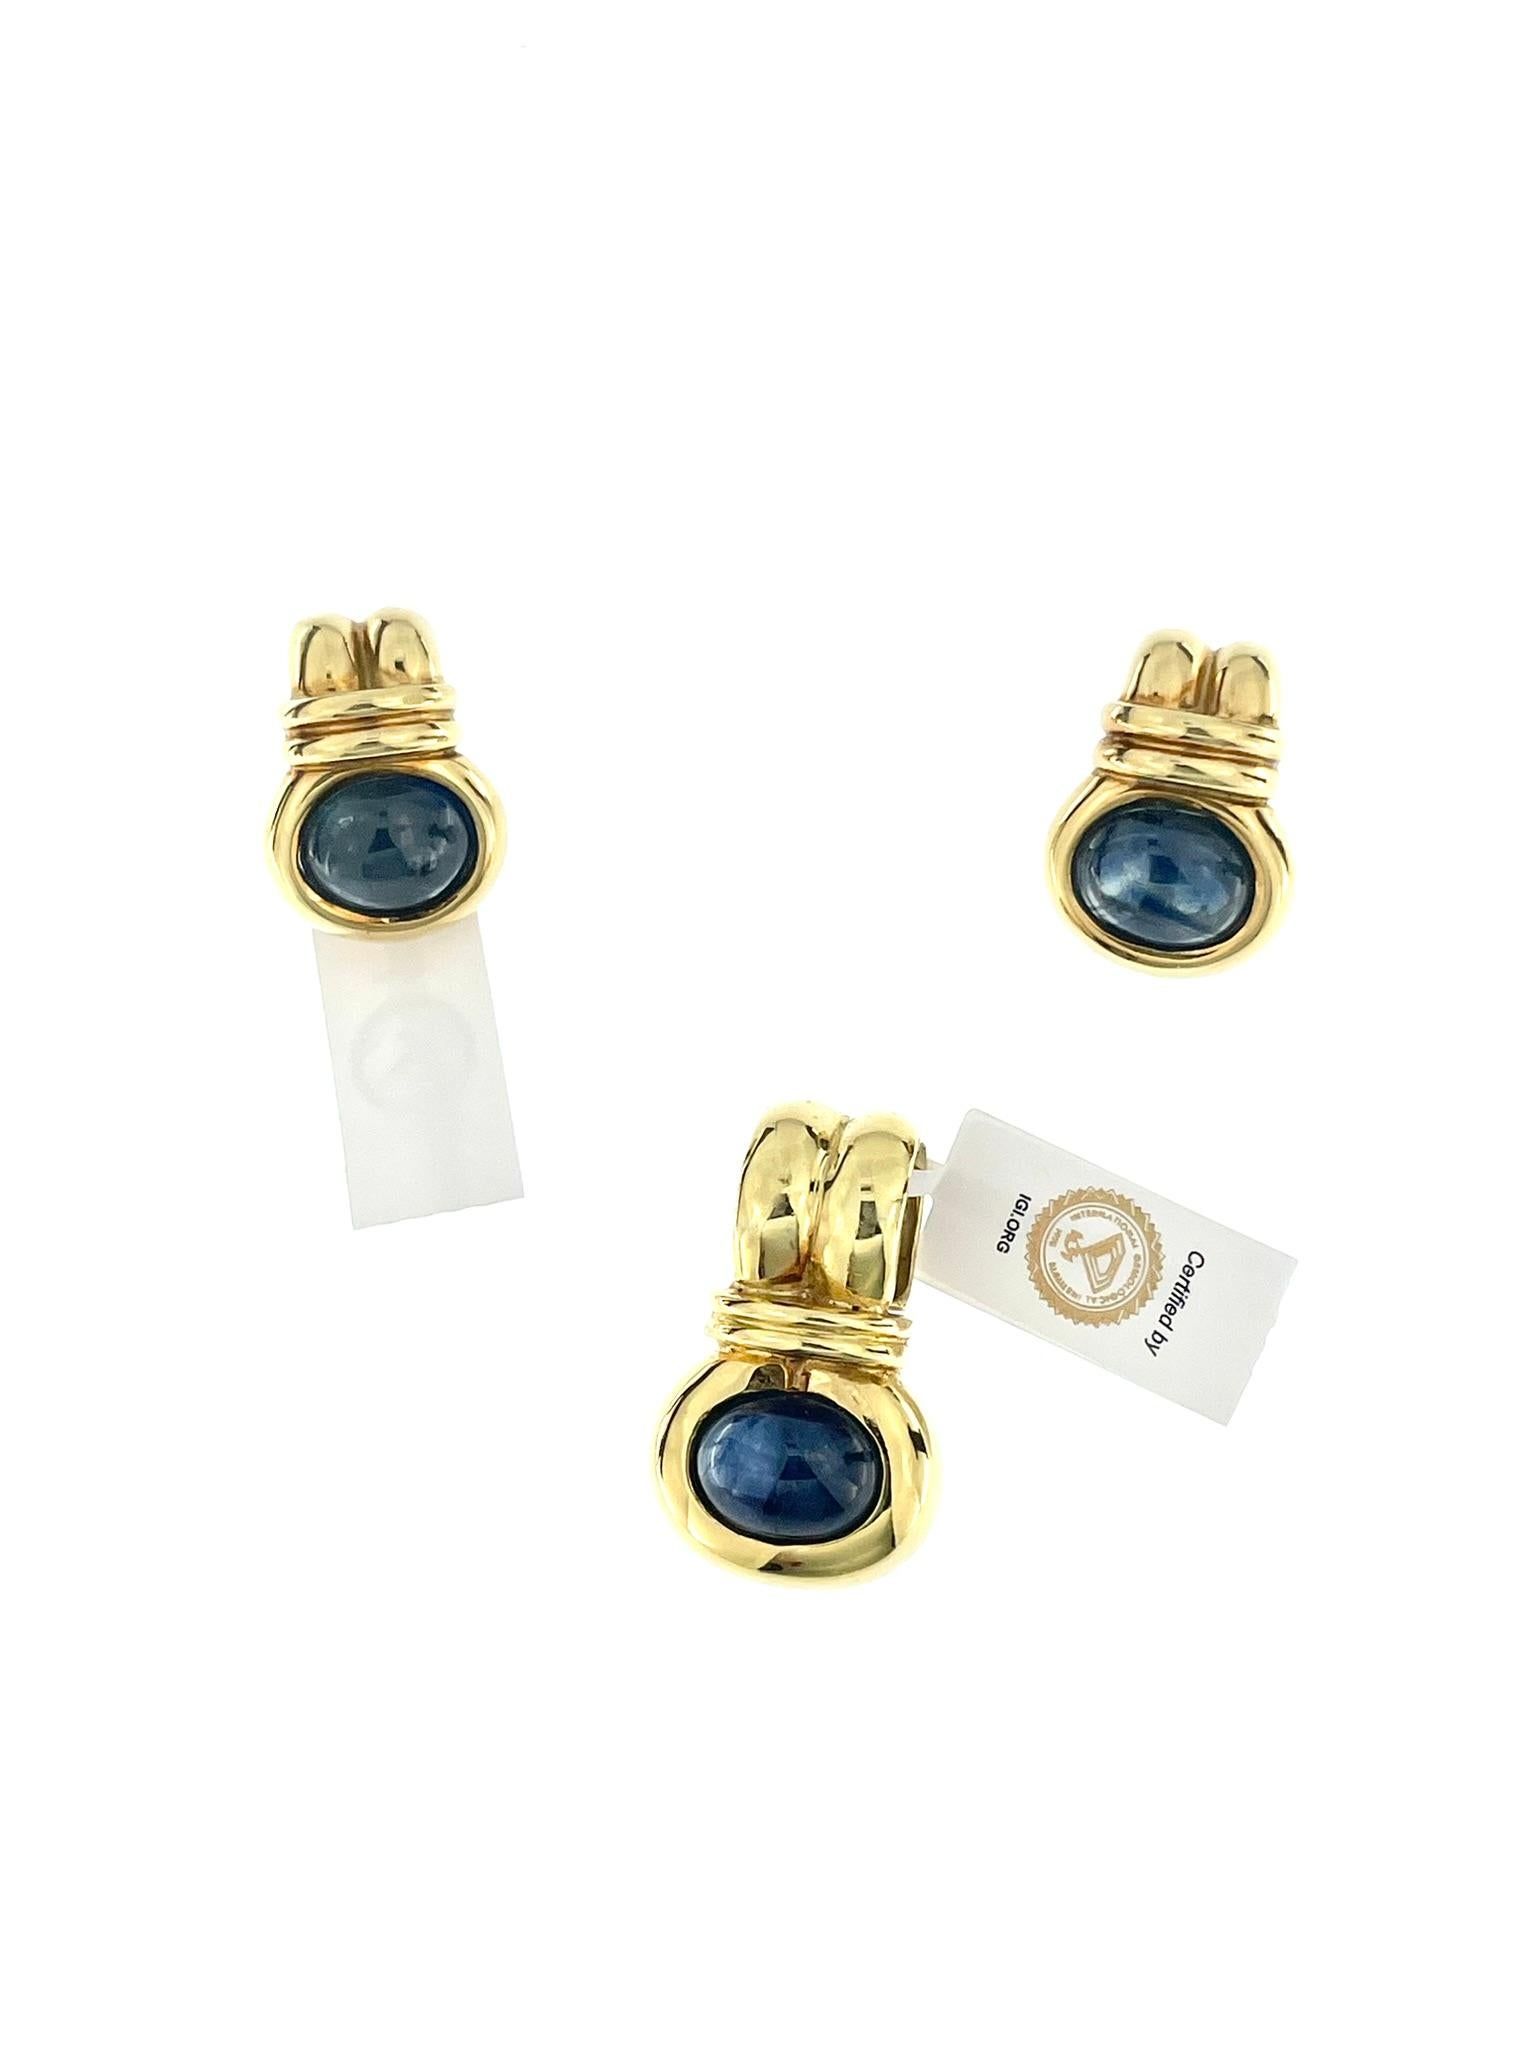 This IGI Certified Ceylon Sapphires Yellow Gold Set is a testament to vintage glamour and sophistication. The set consists of earrings and a pendant, both crafted with precision and elegance.

The focal point of this set are the exquisite cabochon